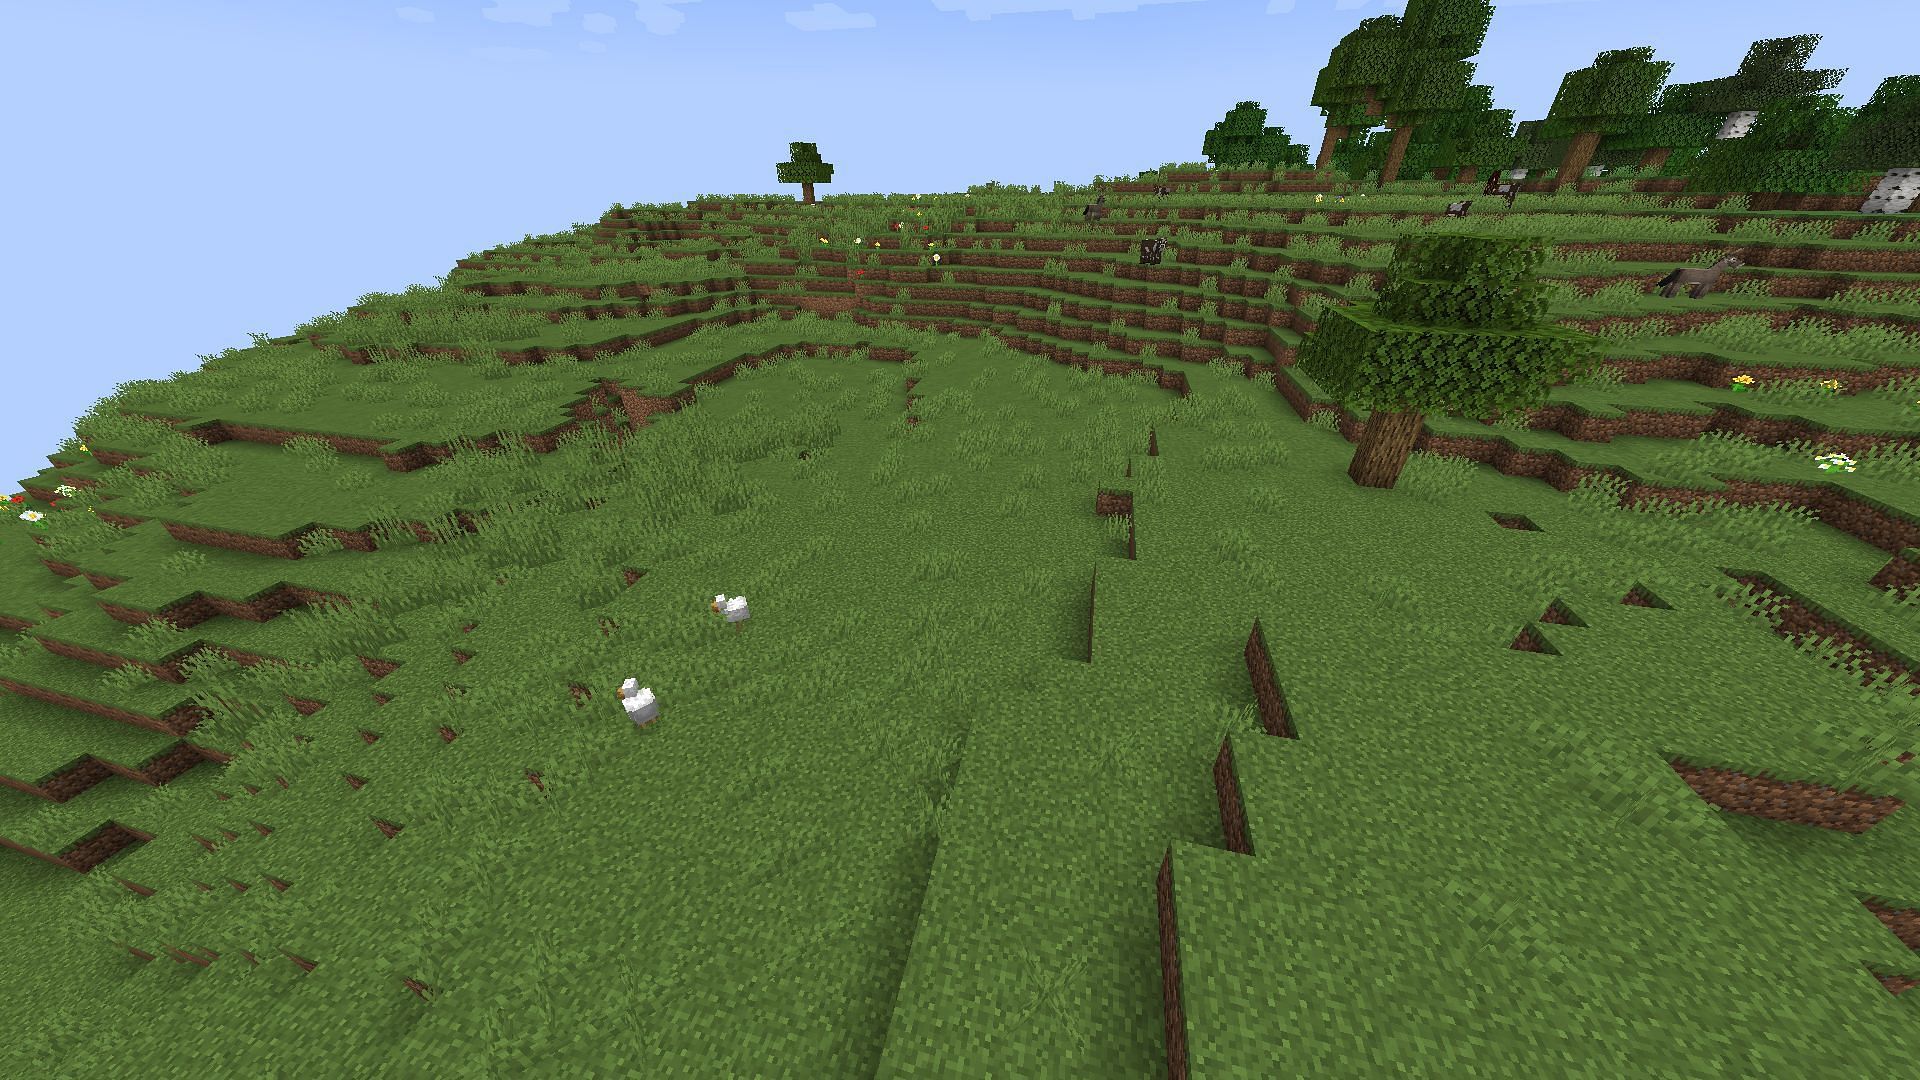 Plains biome is the best for new Minecraft players as it has open and flat terrain (Image via Mojang)